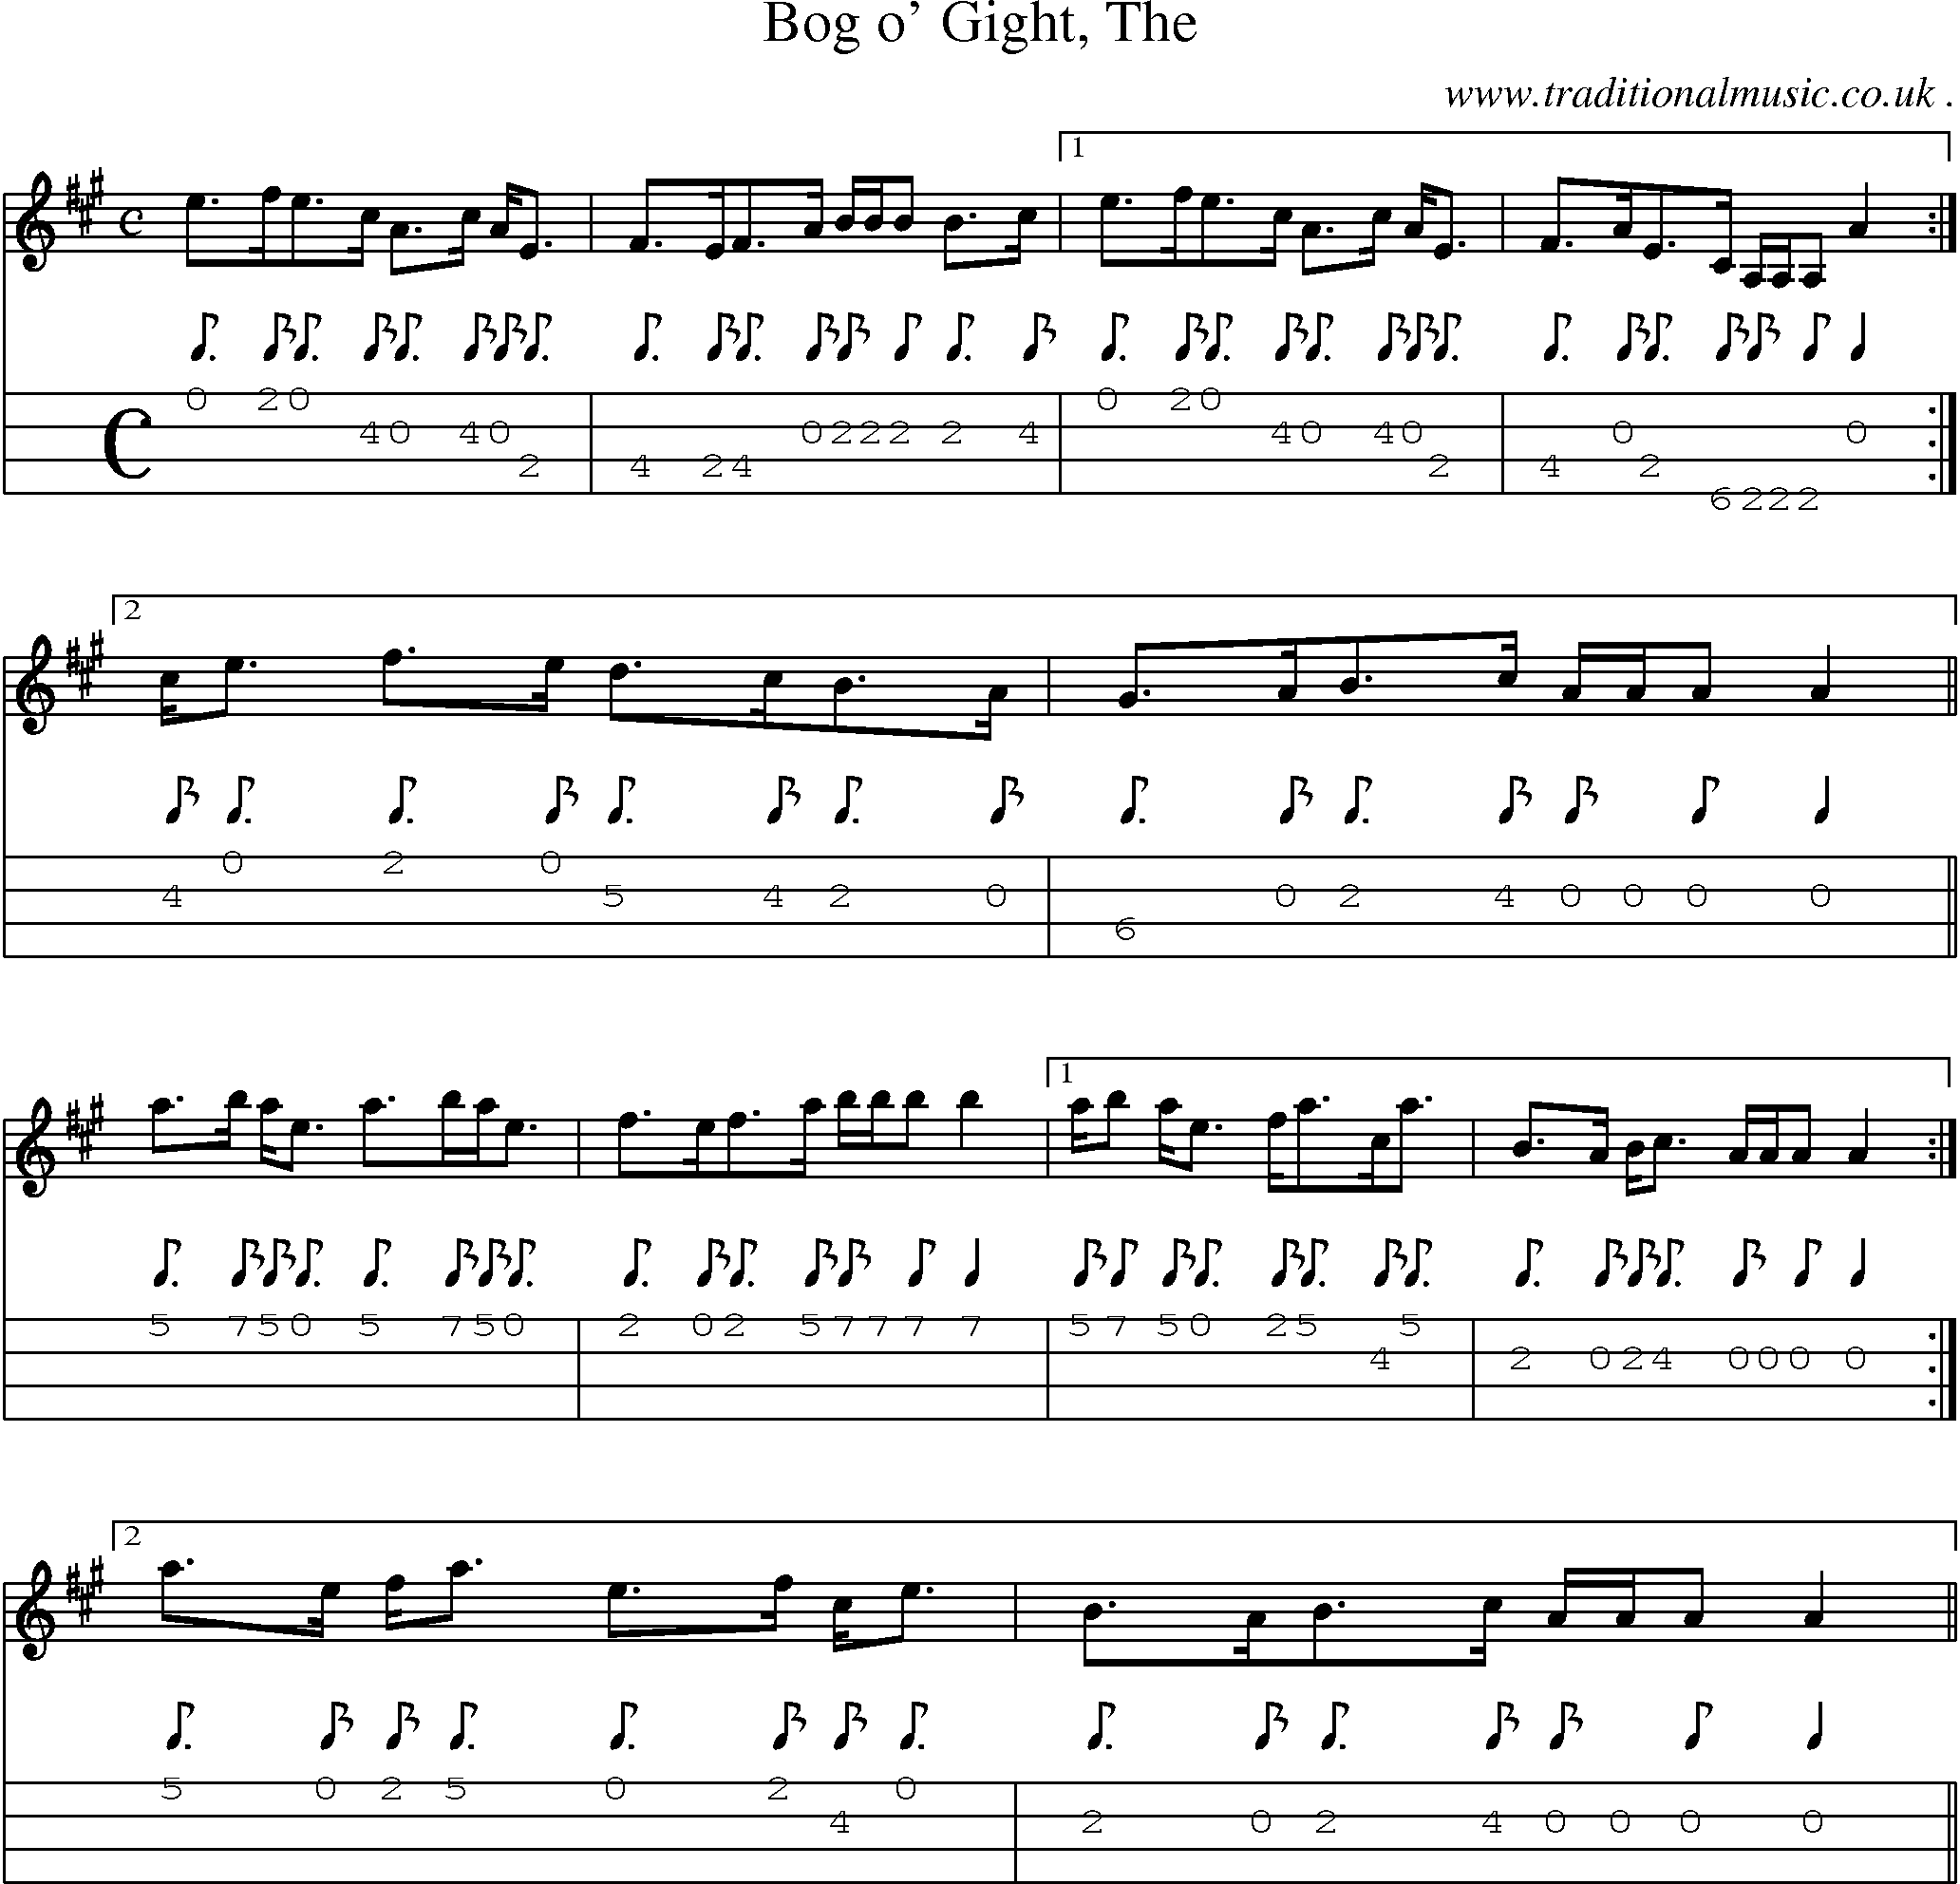 Sheet-music  score, Chords and Mandolin Tabs for Bog O Gight The